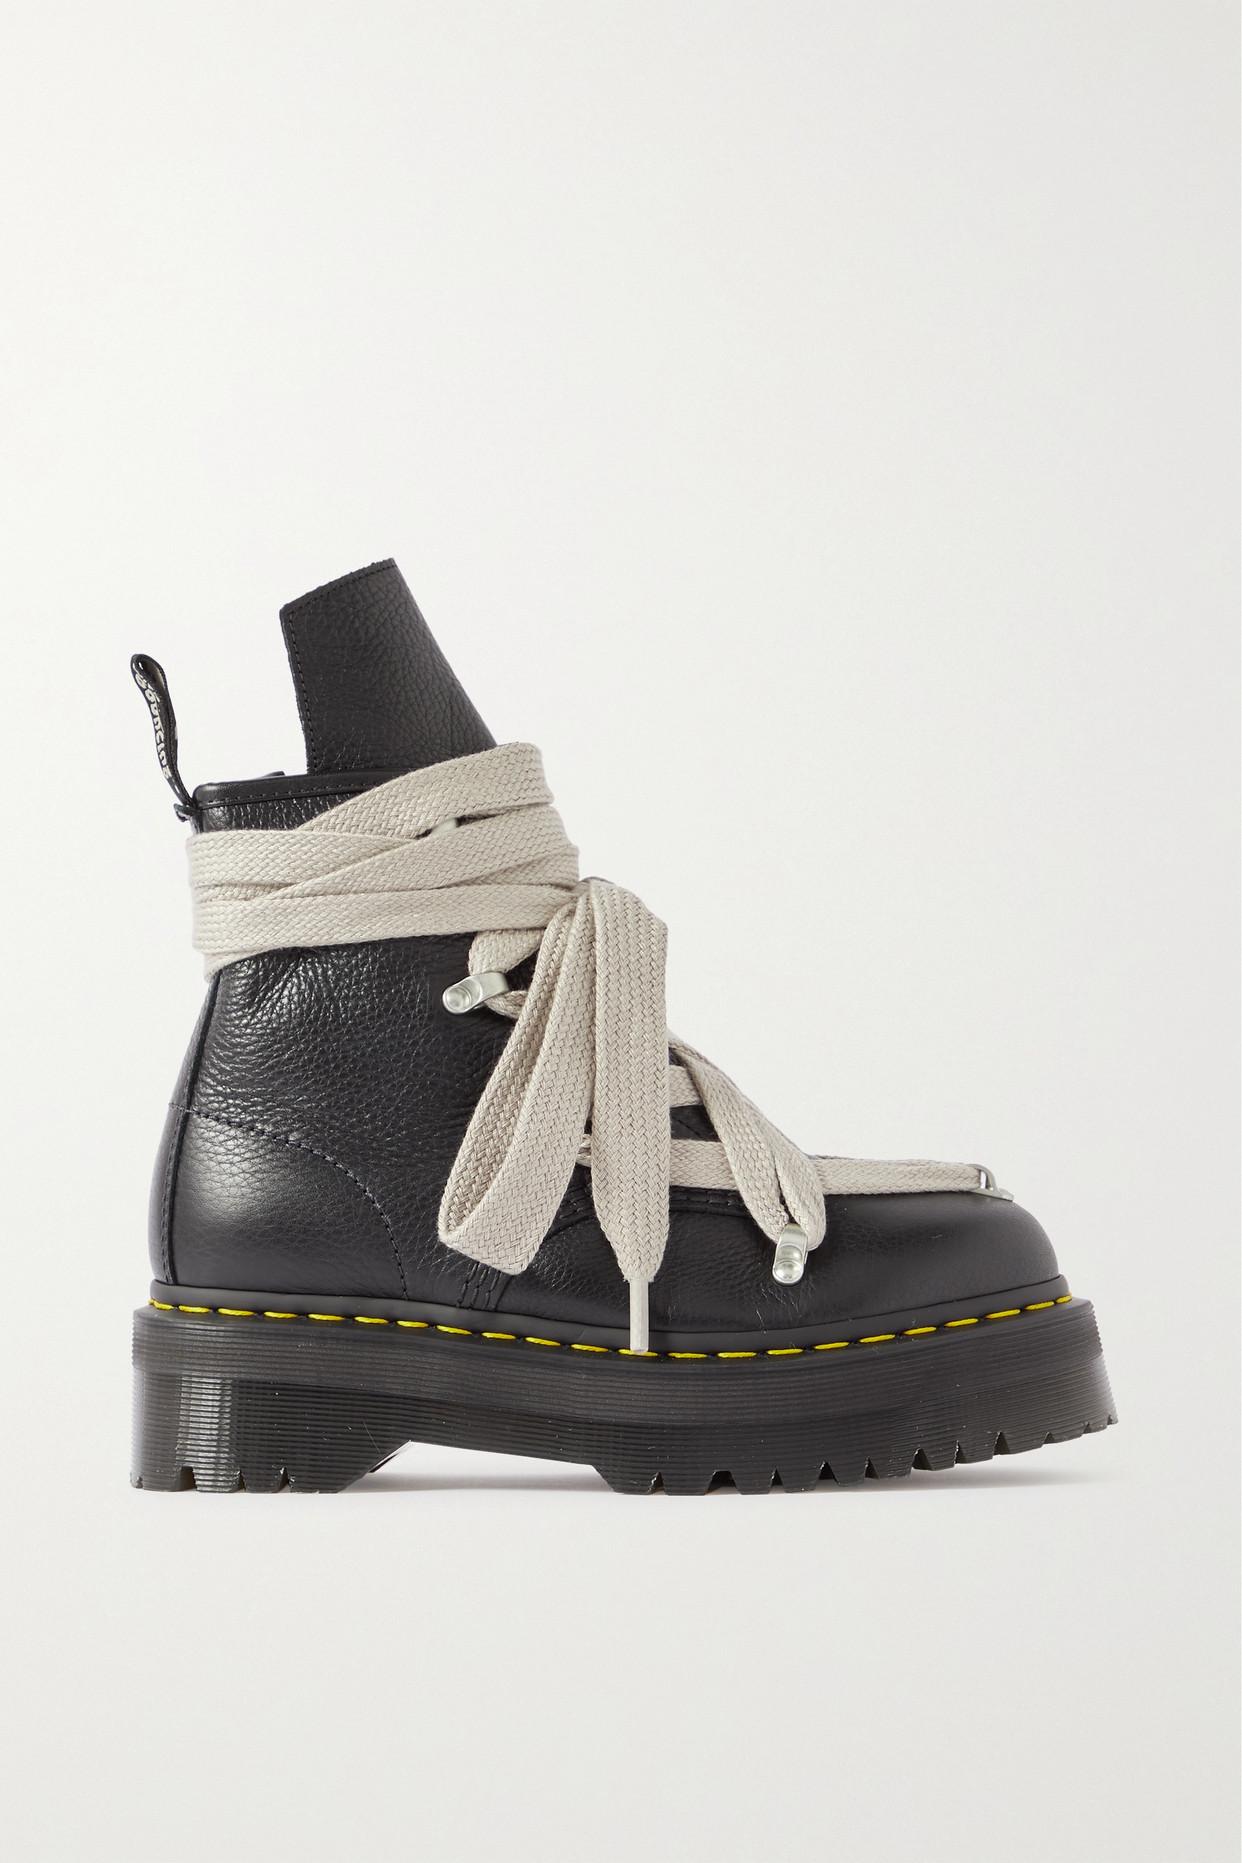 Rick Owens + Dr. Martens 1460 Bex Textured-leather Ankle Boots in Black |  Lyst